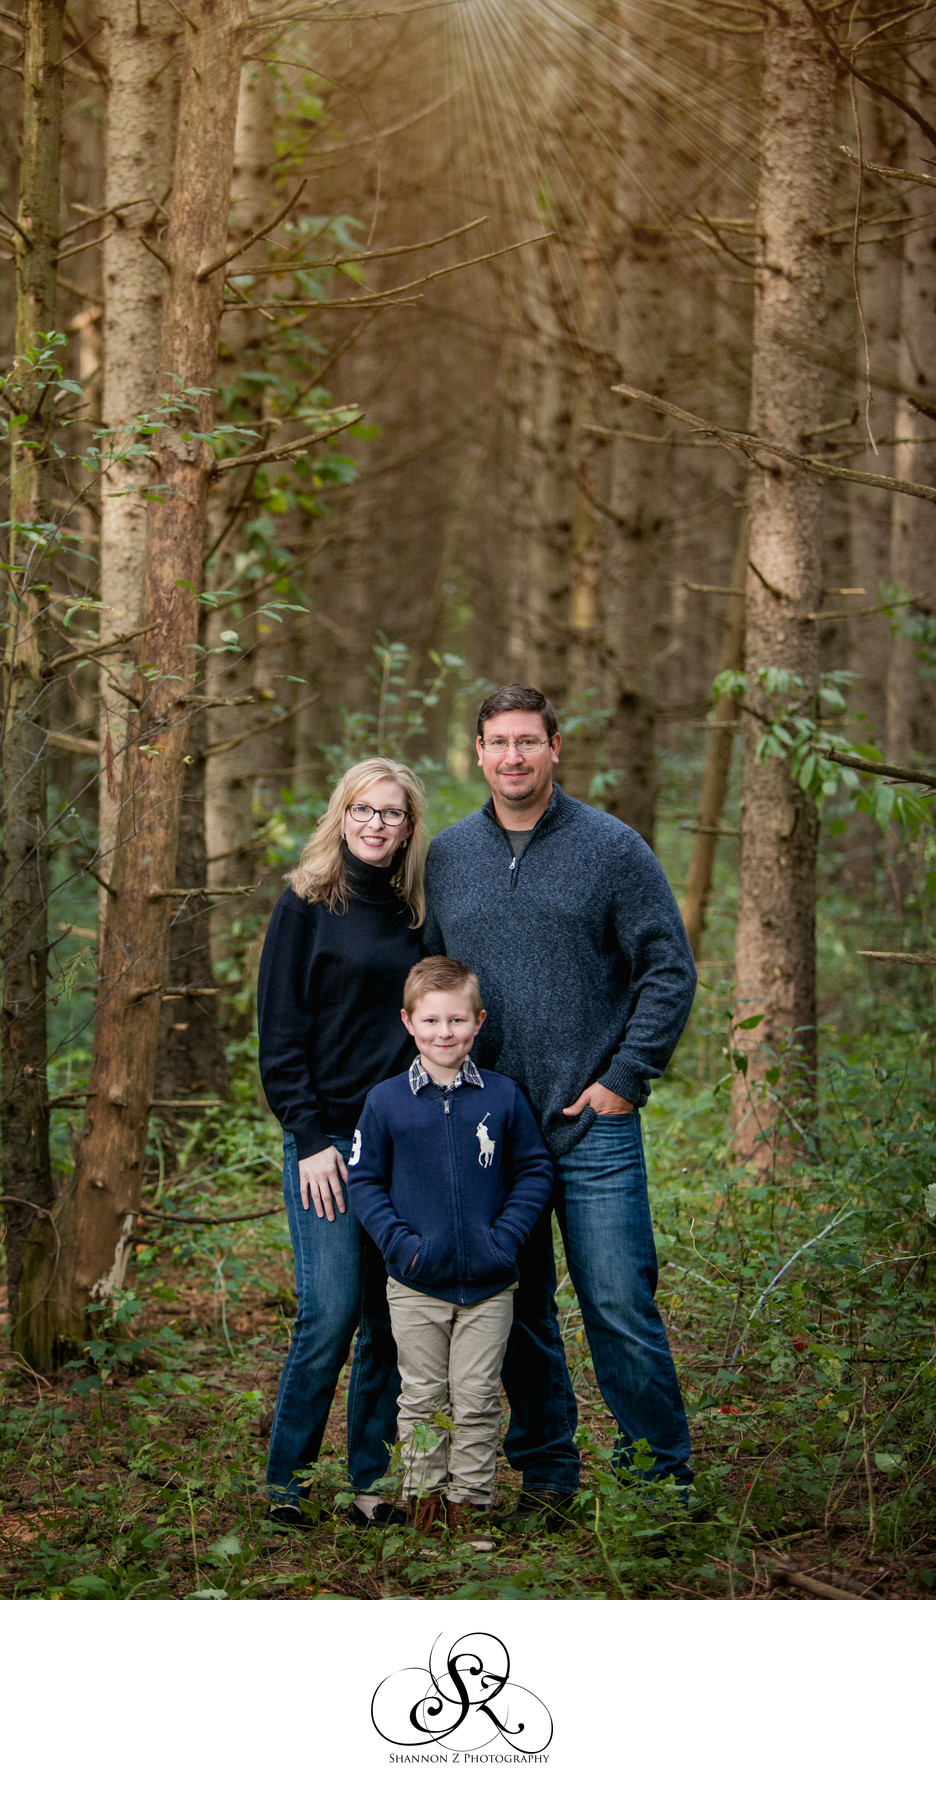 Photos in the Woods: Family Photos